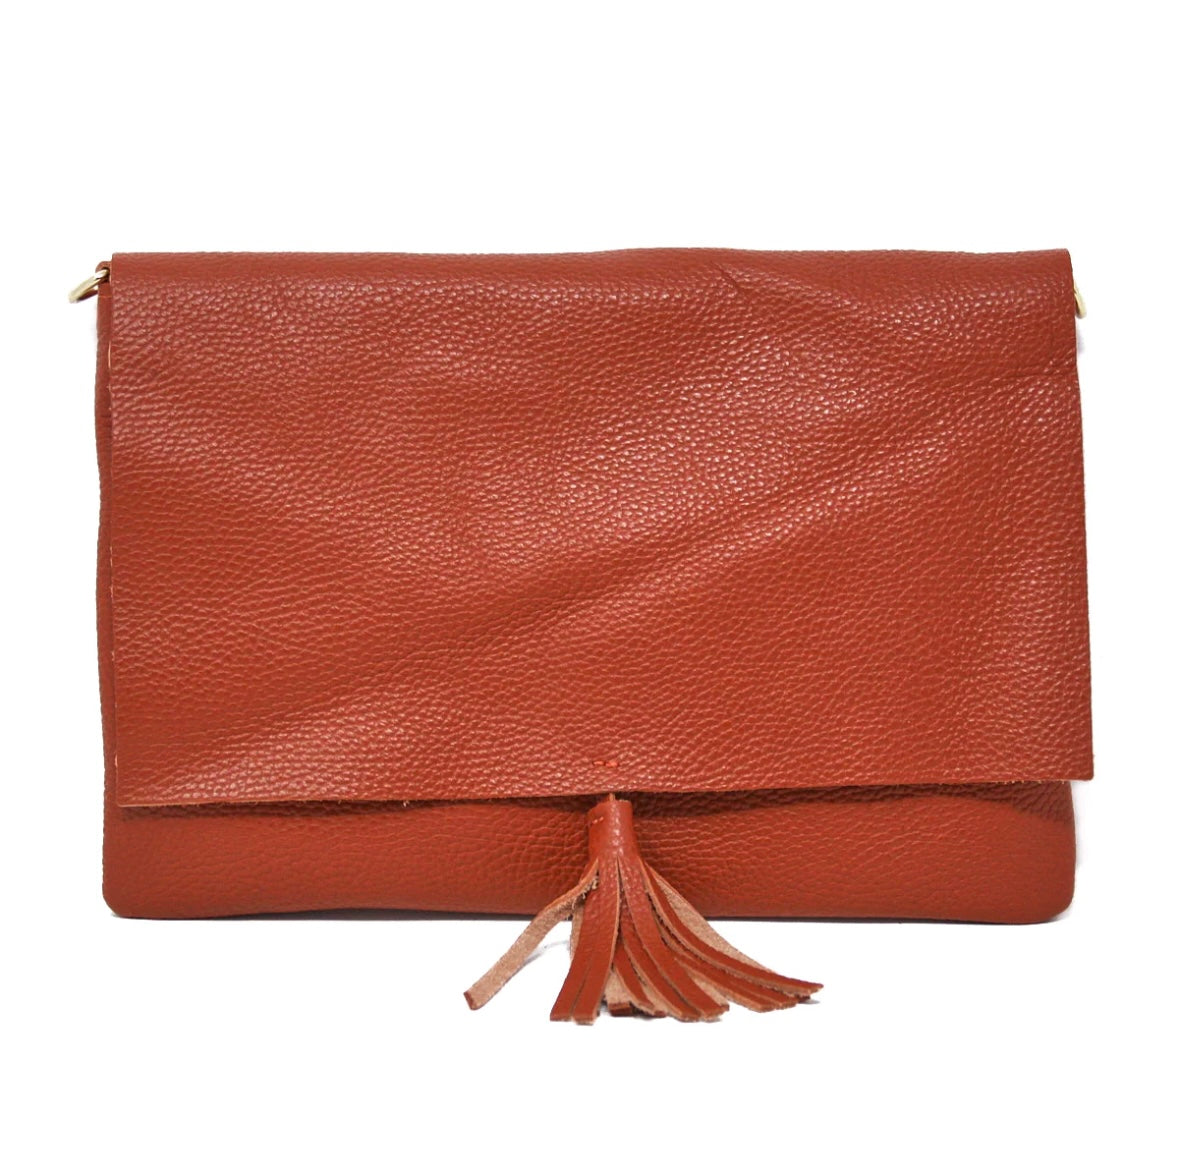 The Grace Fold-Over Clutch